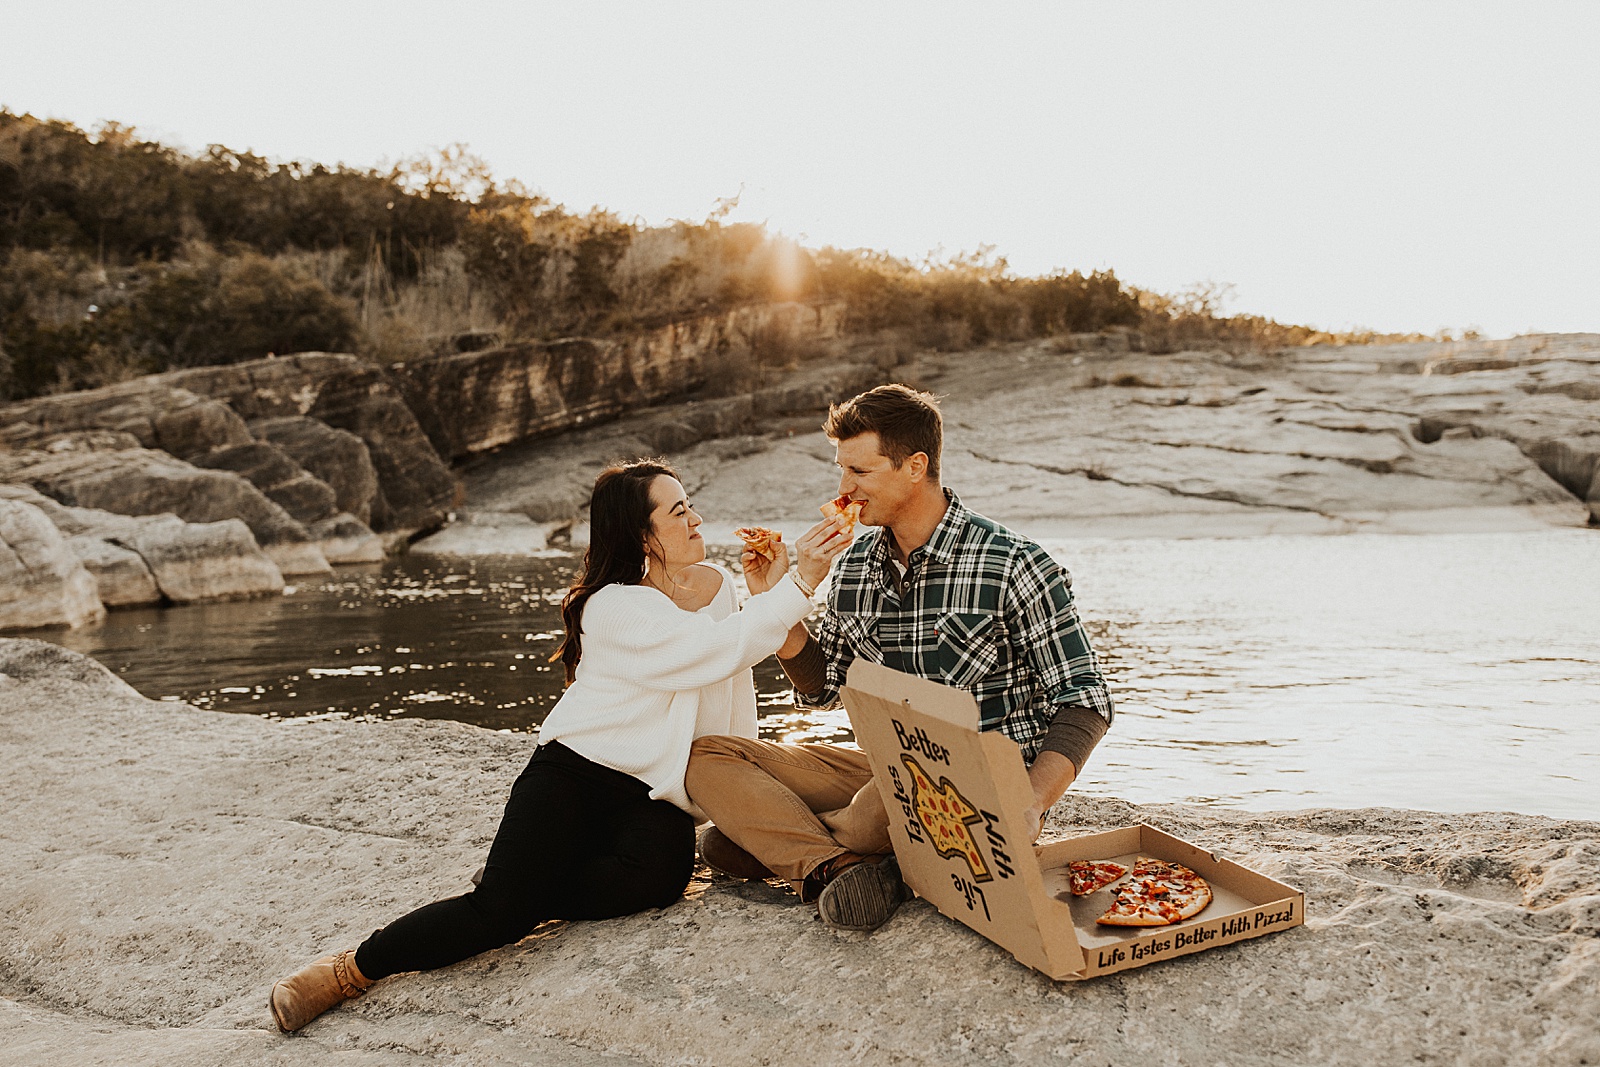 These two enjoyed some pizza and champagne for their engagement photos at Pedernales Falls State Park in Austin, TX.